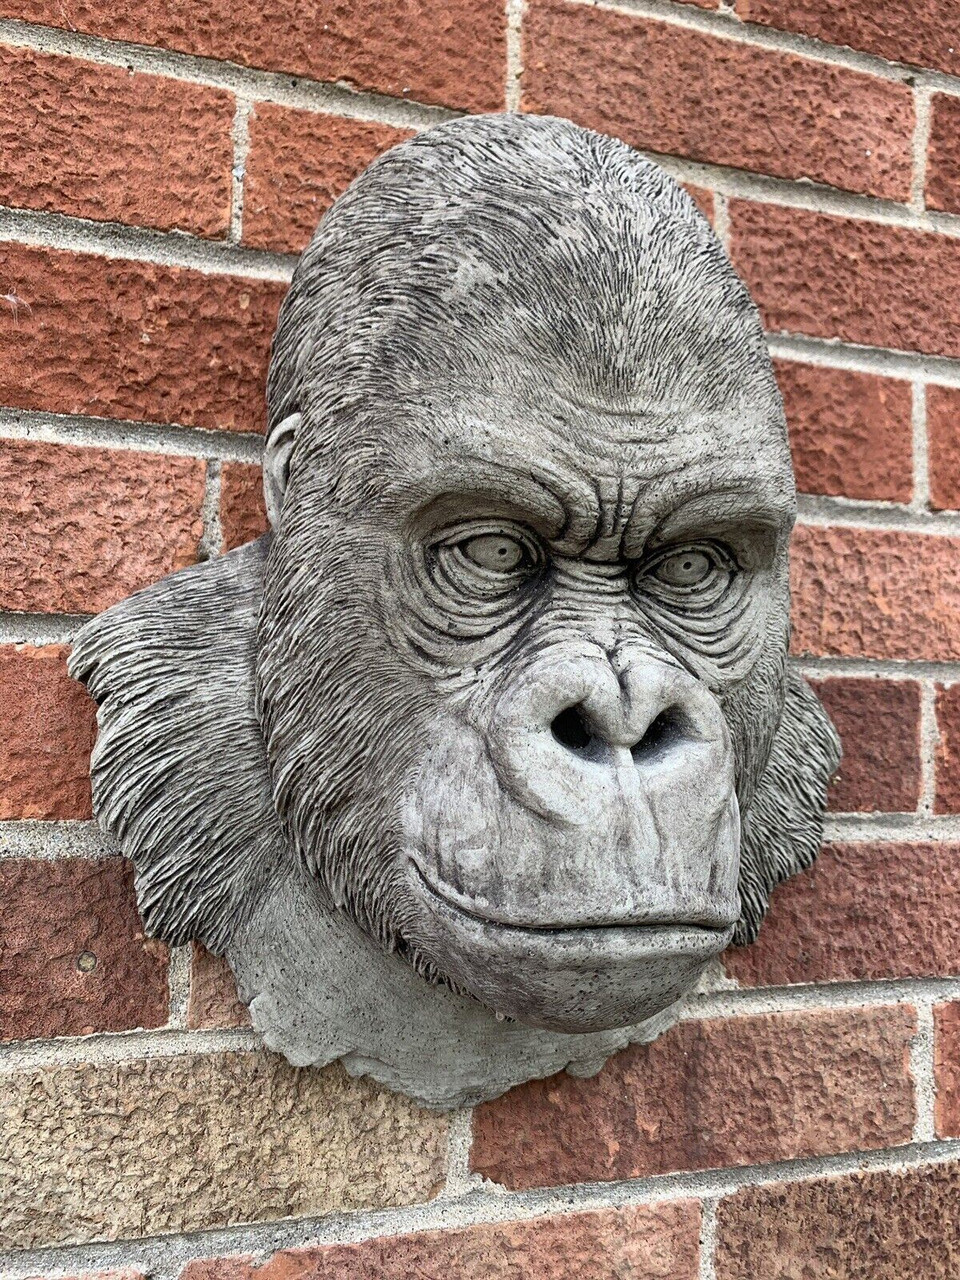 STONE GARDEN LARGE NATURAL DETAILED GORILLA HEAD WALL HANGING PLAQUE ORNAMENT